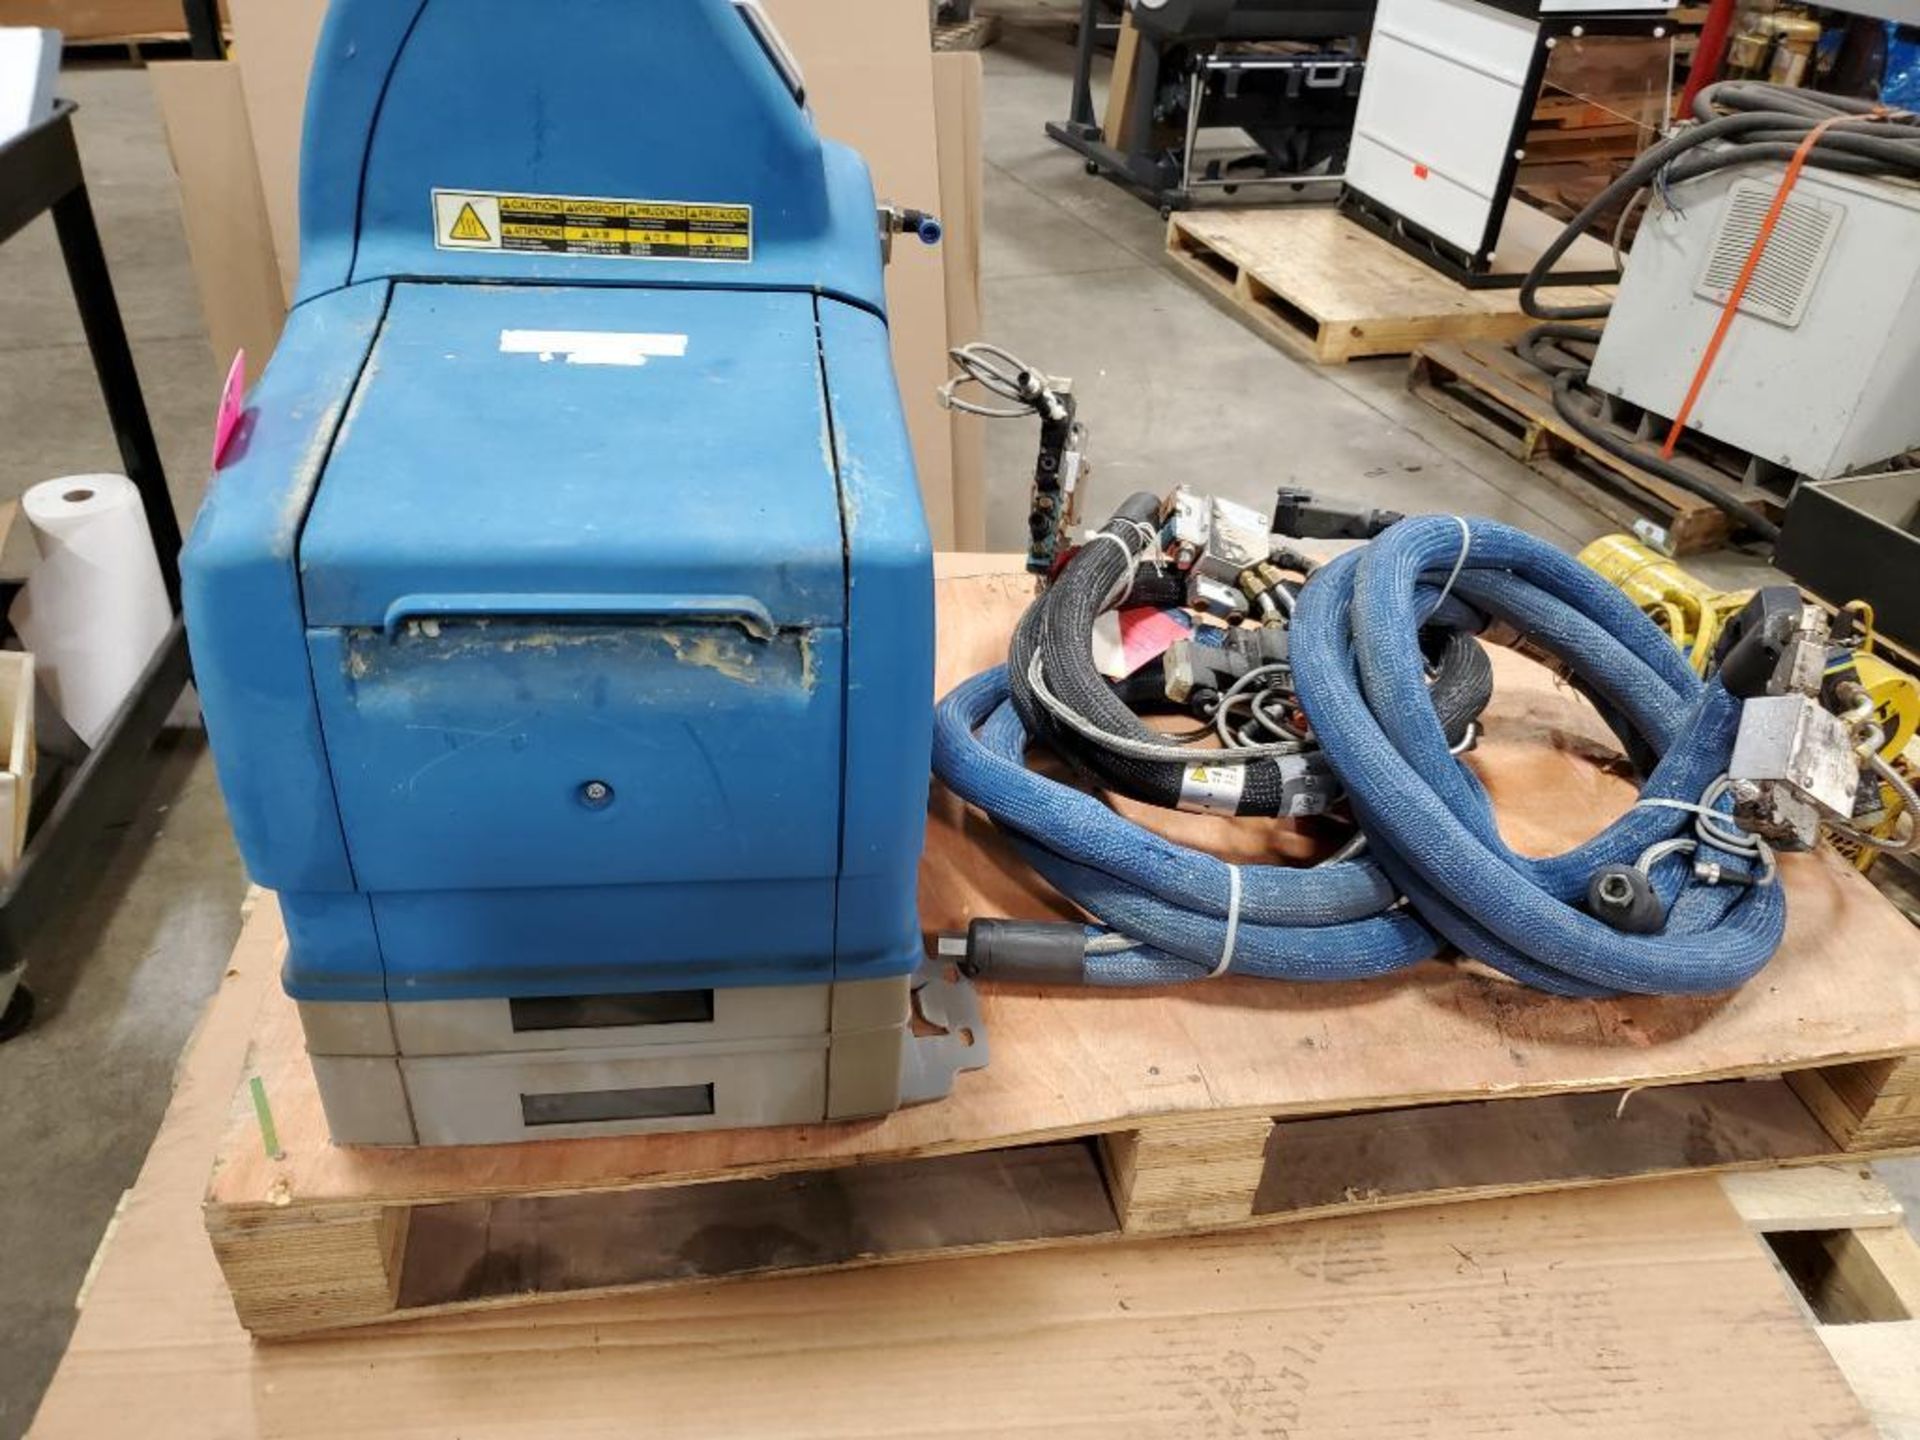 Nordson hot melt adhesive applicating machine. Model PRO Blue 7. Includes 2 hoses and heads. - Image 2 of 14